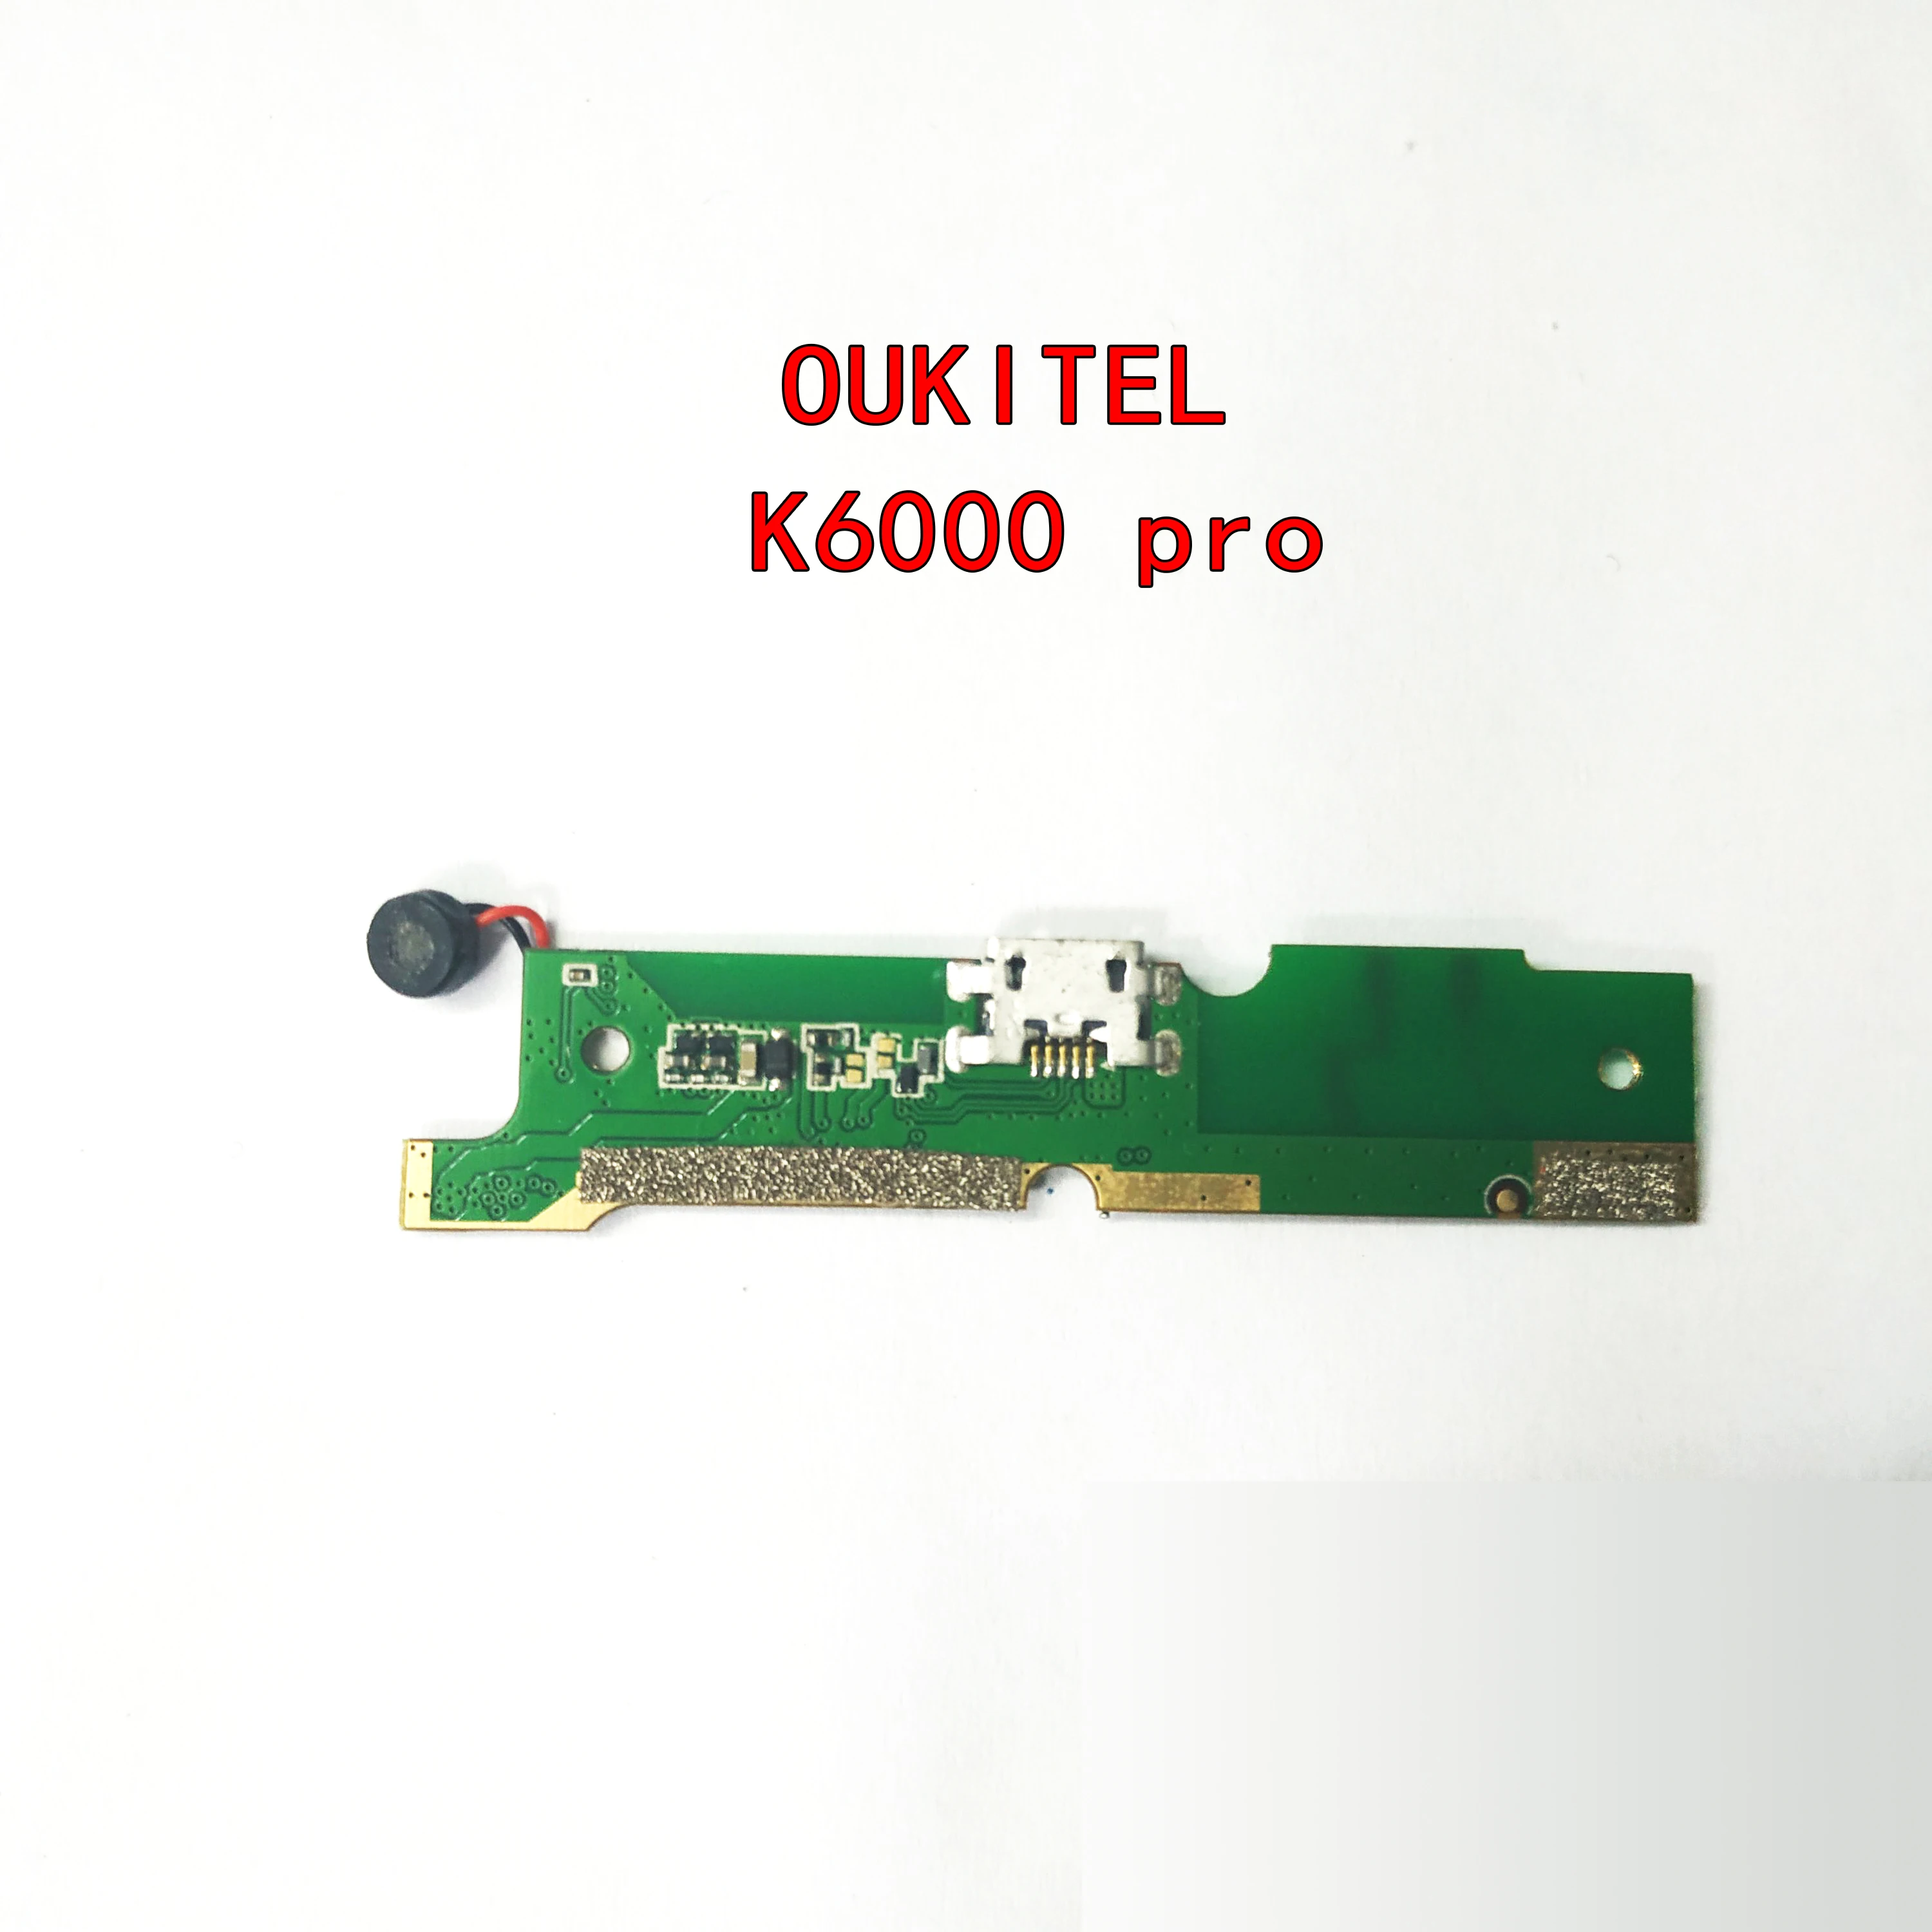 

Original USB Charging Plug USB Slot Charger Port Connector Board Parts Accessories For OUKITEL K6000 Pro Phone